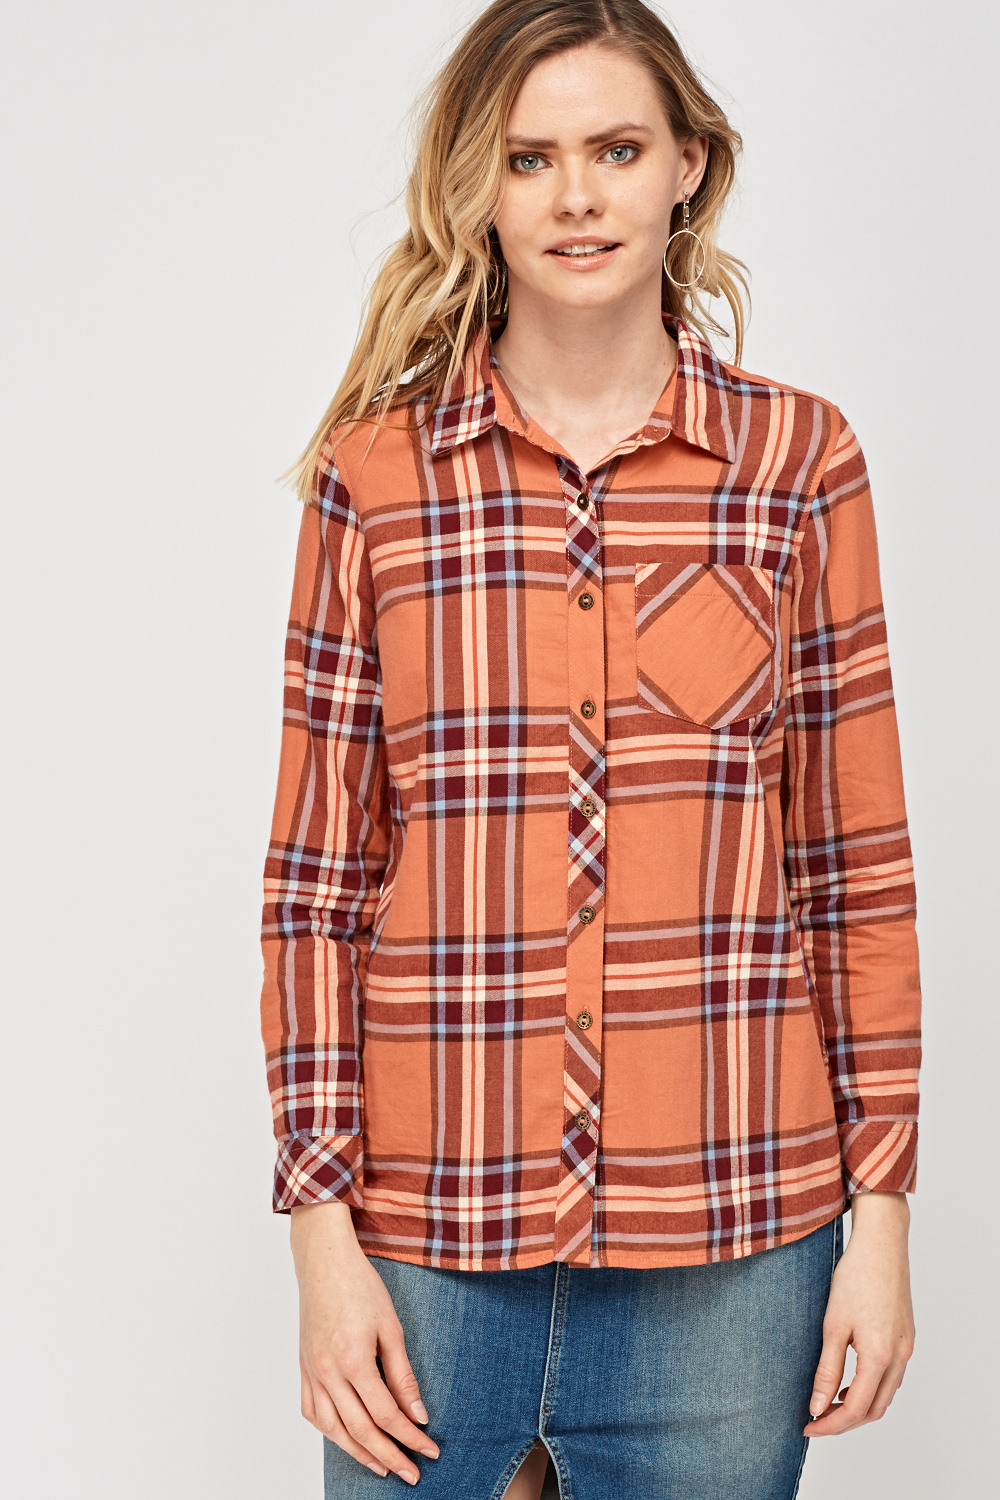 Rust Checked Shirt - Just $6